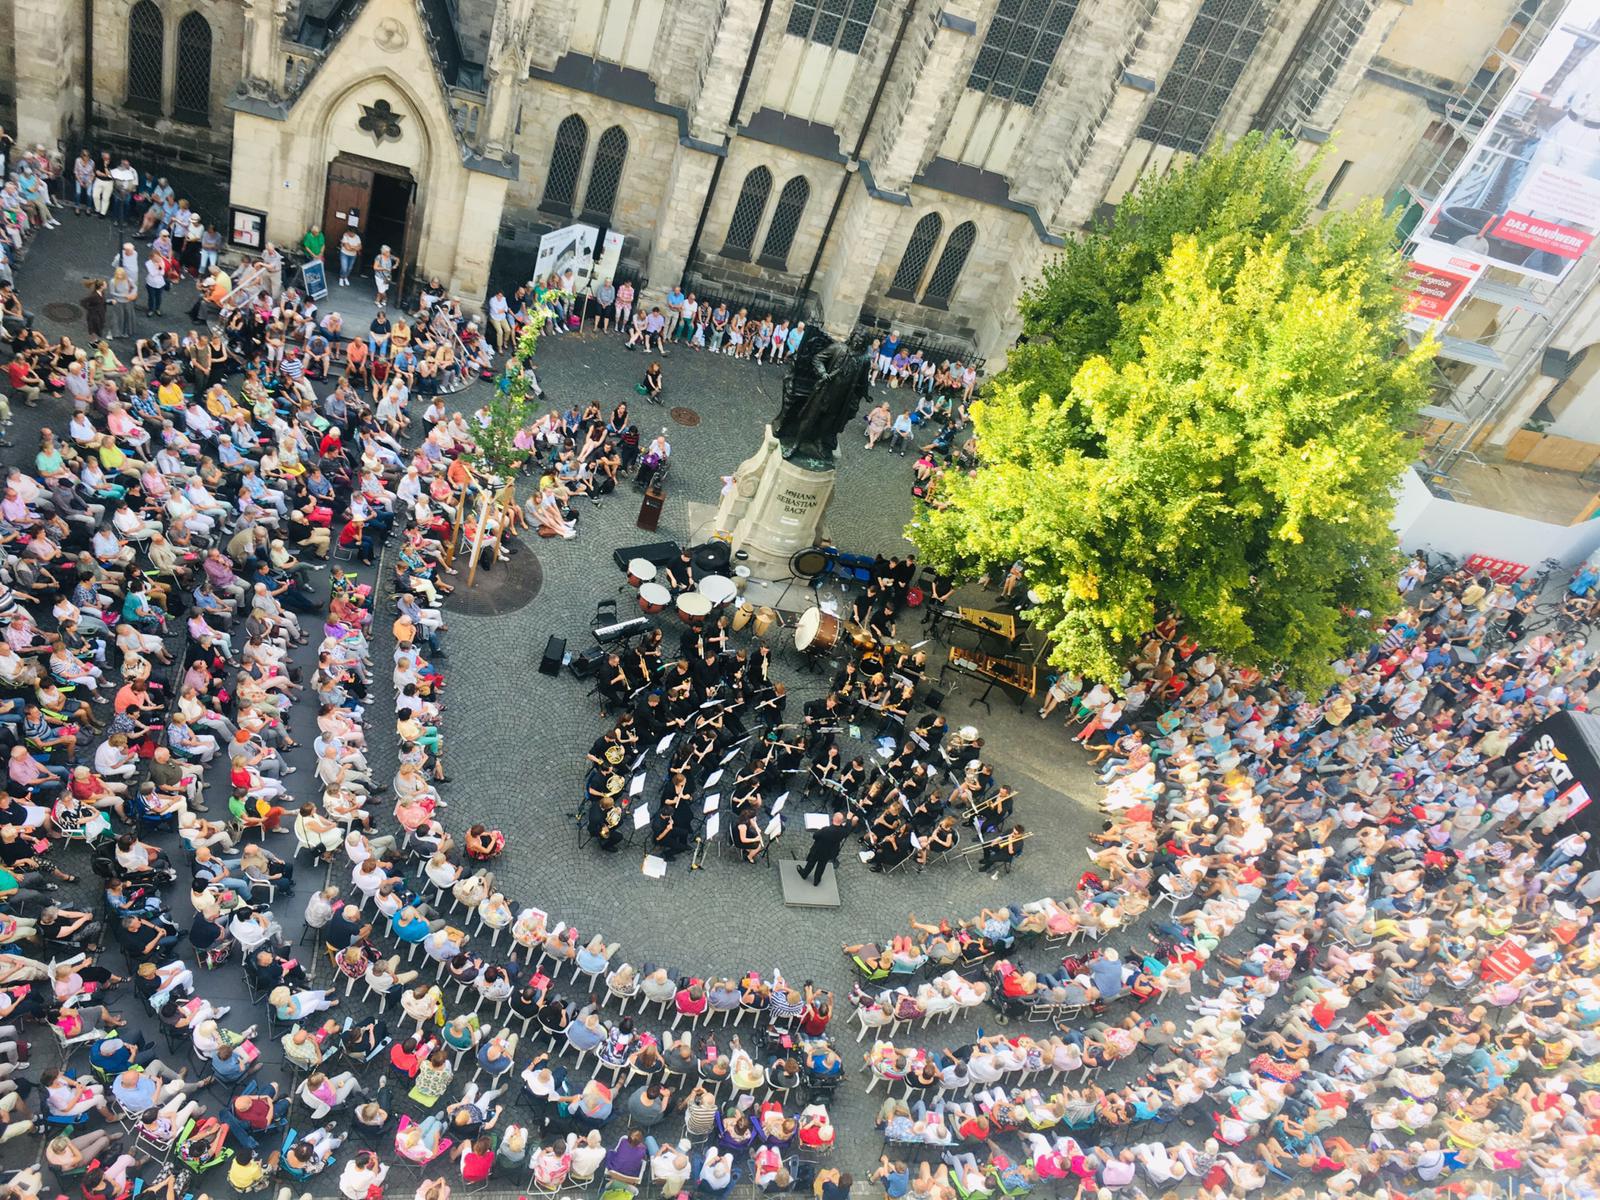 Orchestra perform to thousands of audience members, aerial view